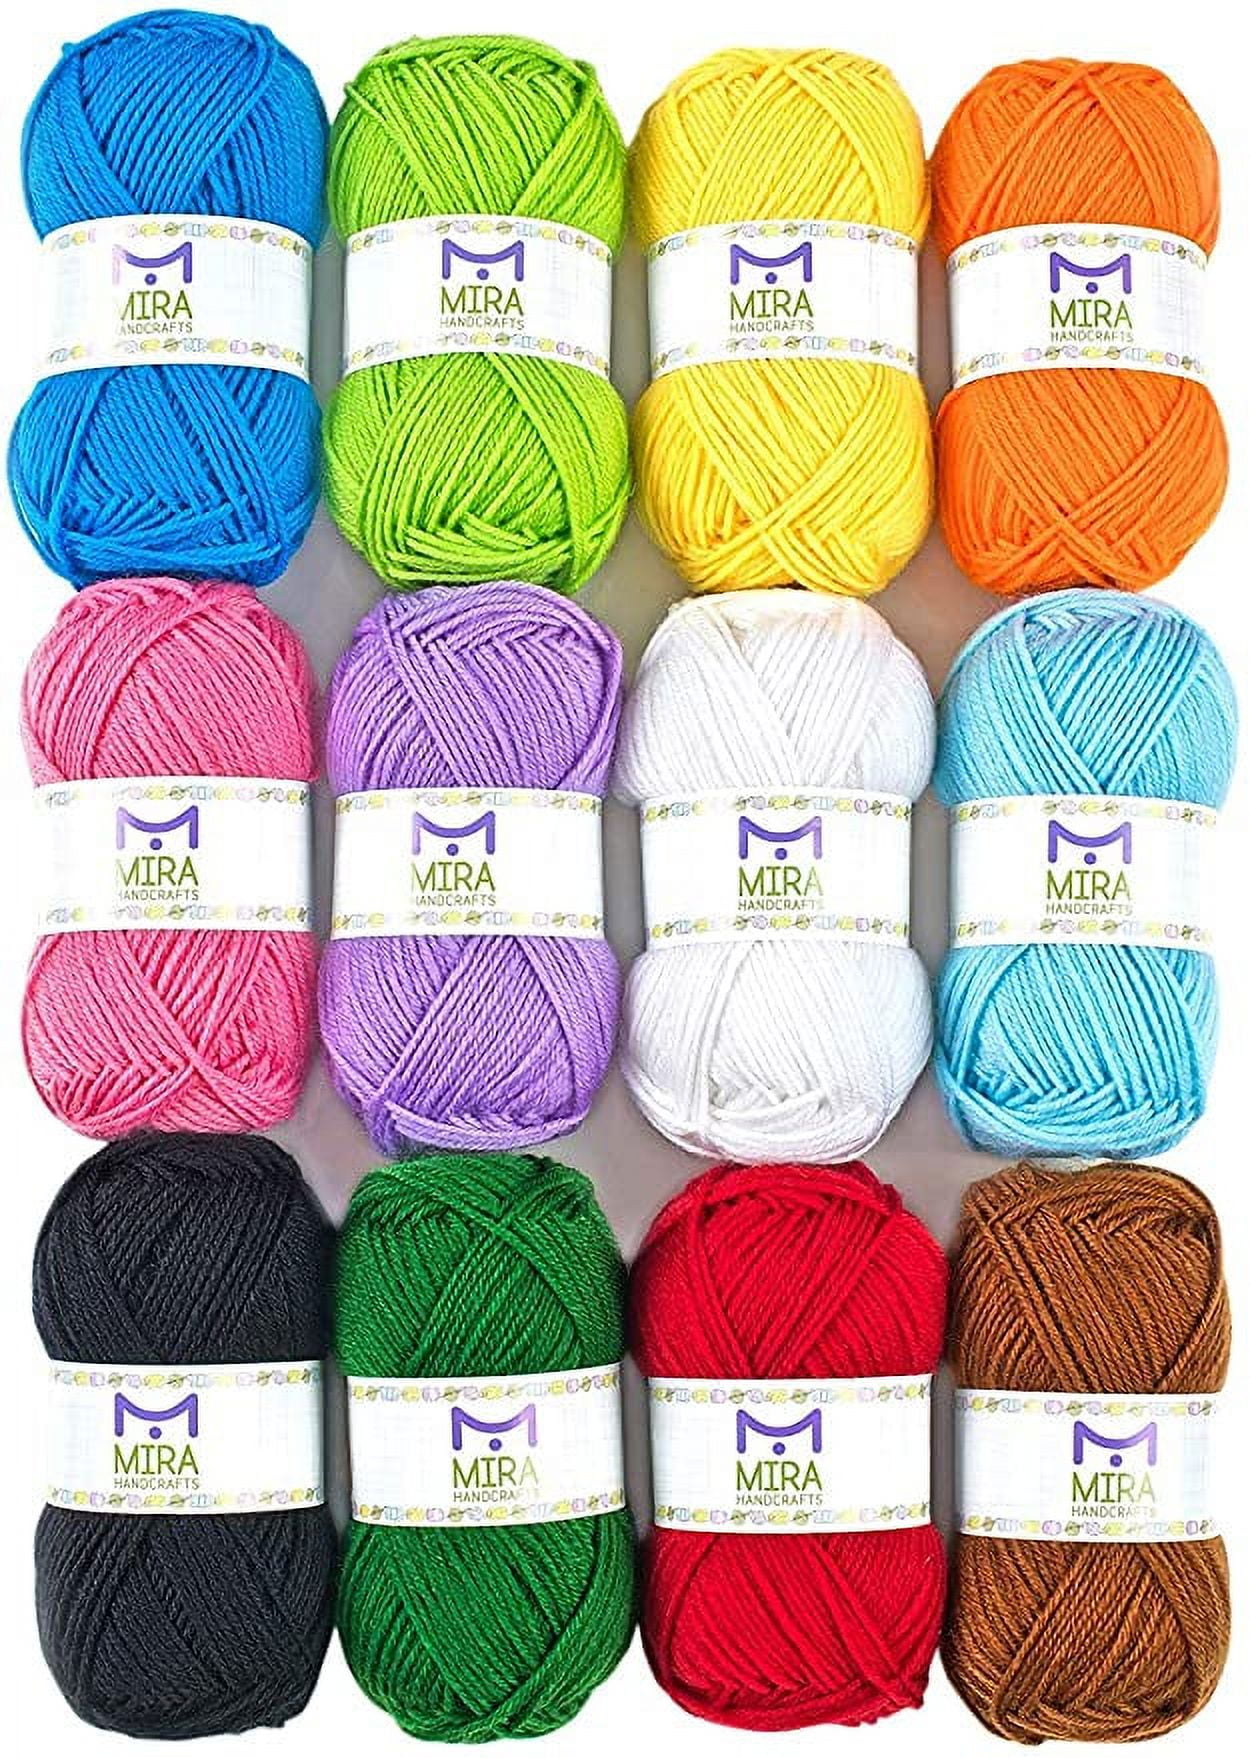 Mira HandCrafts Multicolored Crochet Yarn for Knitting and Crocheting | 5  Variegated Yarn Skeins (50g Each) | Total 547 Yards Bulk Yarn with Crochet